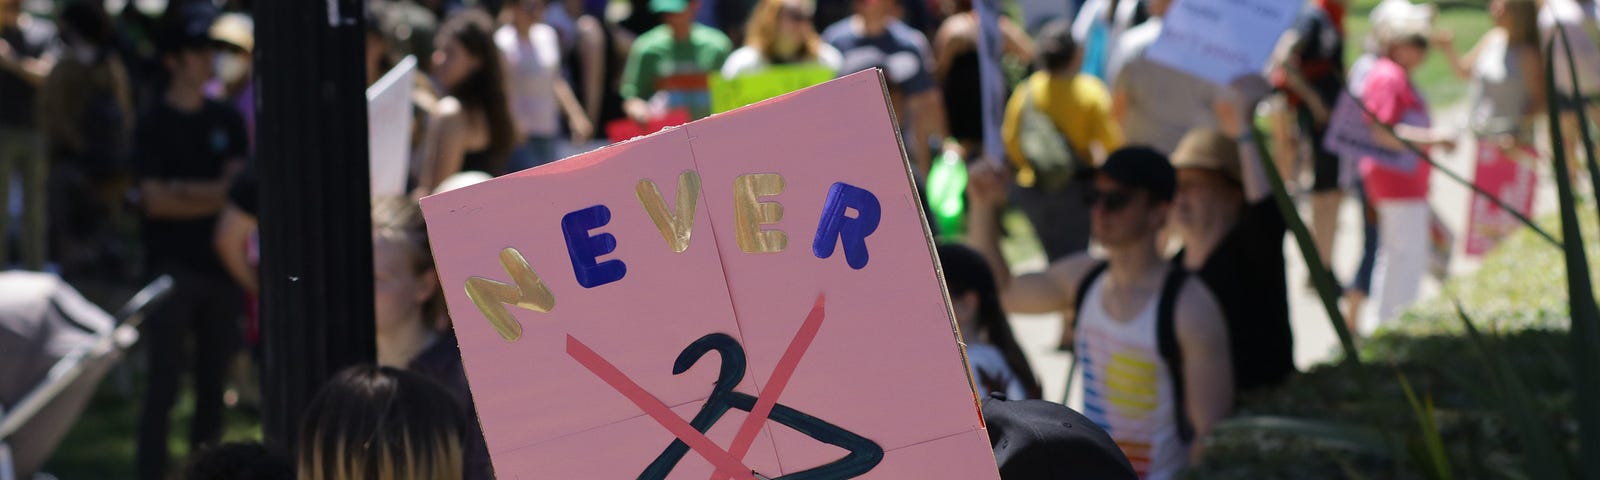 People protesting, with a pink sign in the foreground containing the words “Never Again” and an image of a crossed-out coat hanger